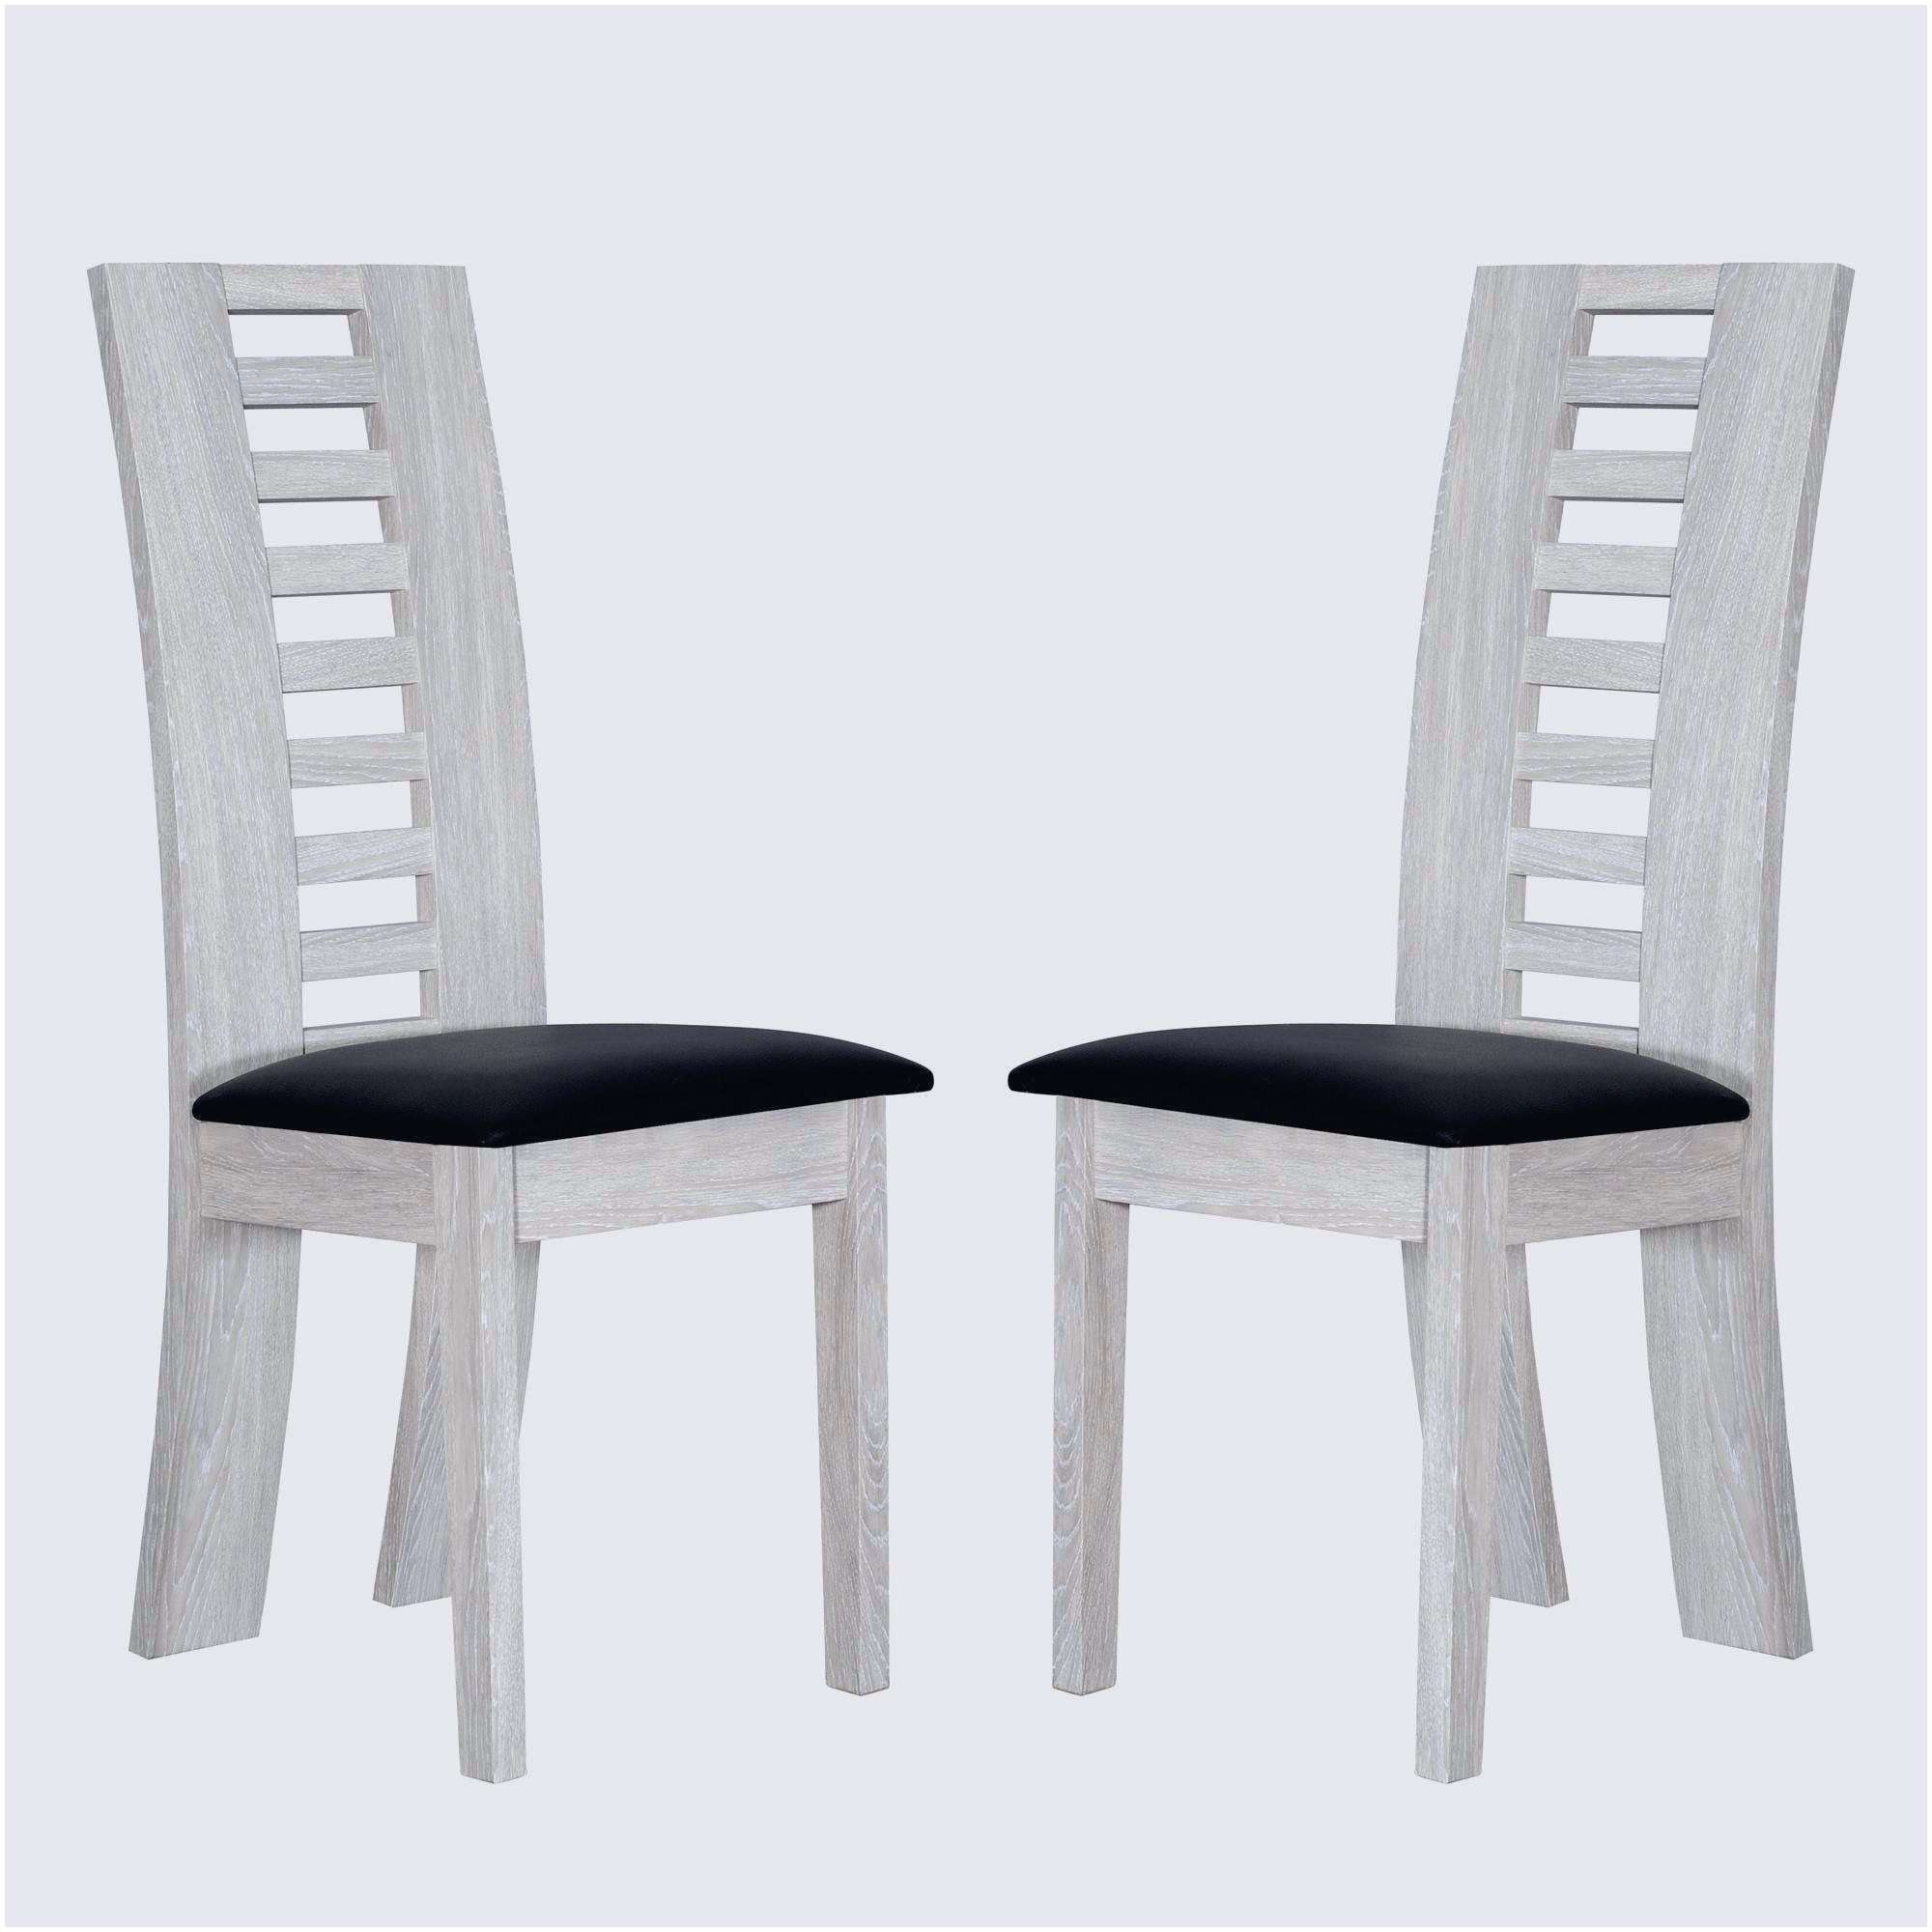 Table Ronde Alinea Best Of Table Et Chaise Pliante Table Et Chaise Pliante with Table